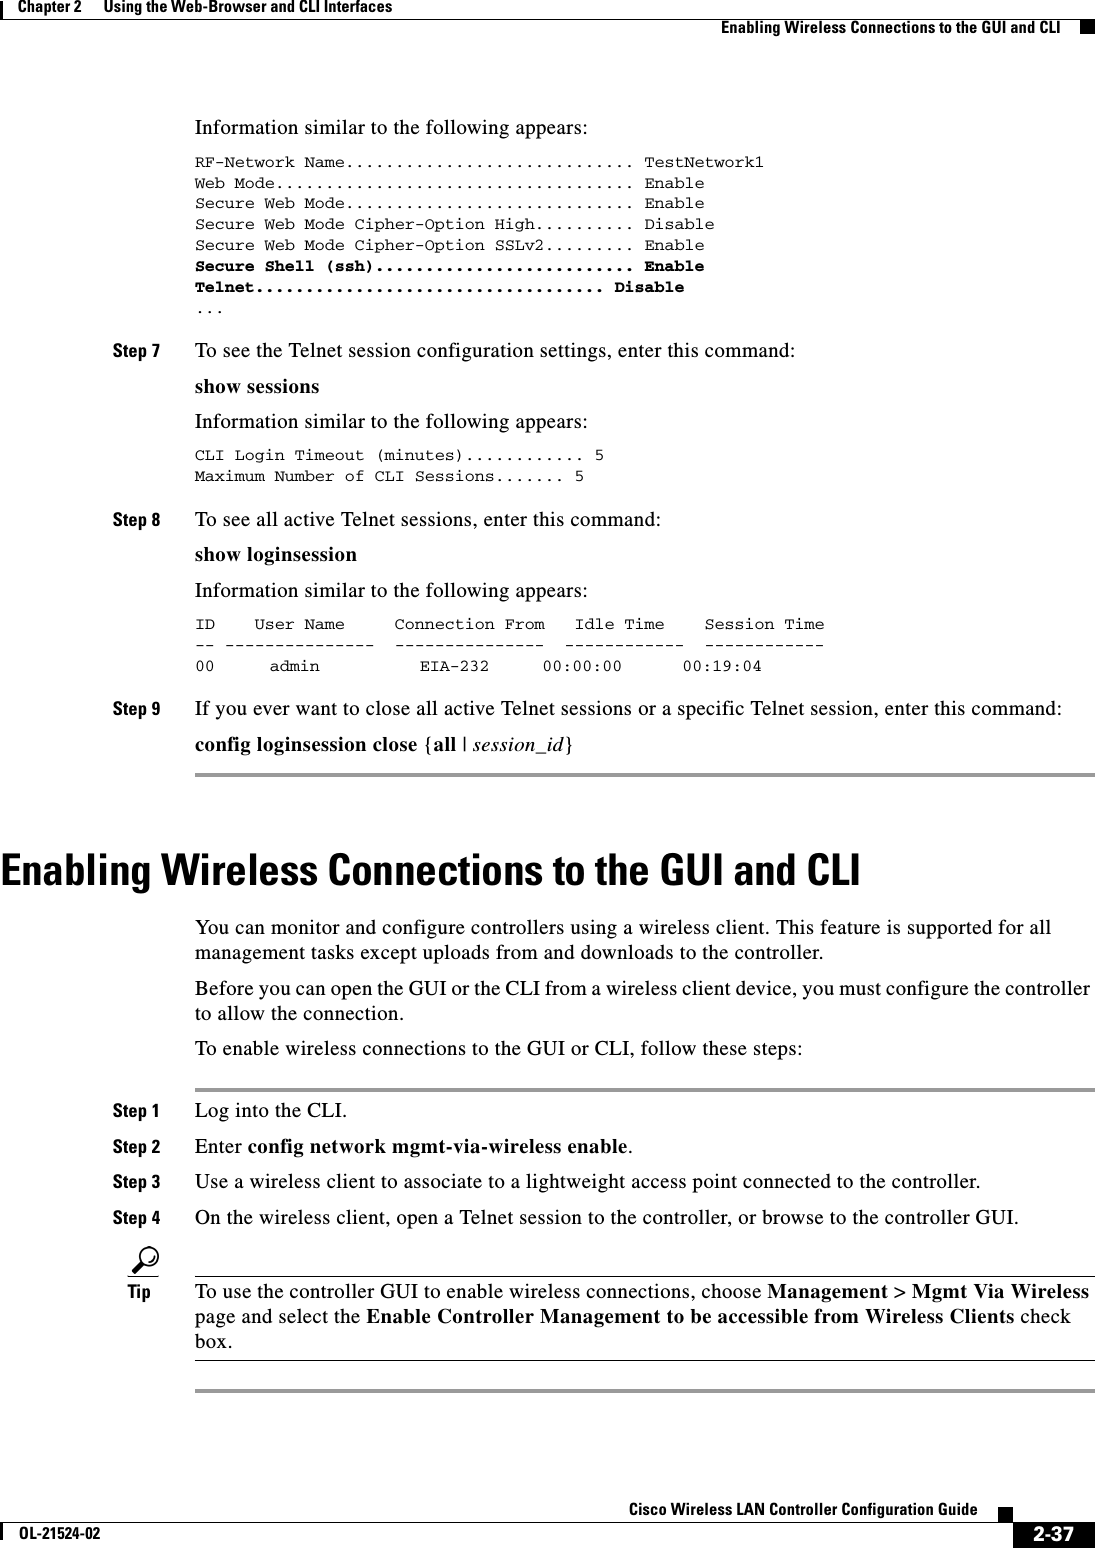  2-37Cisco Wireless LAN Controller Configuration GuideOL-21524-02Chapter 2      Using the Web-Browser and CLI InterfacesEnabling Wireless Connections to the GUI and CLIInformation similar to the following appears:RF-Network Name............................. TestNetwork1Web Mode.................................... EnableSecure Web Mode............................. EnableSecure Web Mode Cipher-Option High.......... DisableSecure Web Mode Cipher-Option SSLv2......... EnableSecure Shell (ssh).......................... EnableTelnet................................... Disable ... Step 7 To see the Telnet session configuration settings, enter this command:show sessionsInformation similar to the following appears:CLI Login Timeout (minutes)............ 5Maximum Number of CLI Sessions....... 5 Step 8 To see all active Telnet sessions, enter this command:show loginsessionInformation similar to the following appears:ID    User Name     Connection From   Idle Time    Session Time-- ---------------  ---------------  ------------  ------------00    admin       EIA-232     00:00:00      00:19:04 Step 9 If you ever want to close all active Telnet sessions or a specific Telnet session, enter this command:config loginsession close {all | session_id}Enabling Wireless Connections to the GUI and CLIYou can monitor and configure controllers using a wireless client. This feature is supported for all management tasks except uploads from and downloads to the controller.Before you can open the GUI or the CLI from a wireless client device, you must configure the controller to allow the connection. To enable wireless connections to the GUI or CLI, follow these steps:Step 1 Log into the CLI.Step 2 Enter config network mgmt-via-wireless enable.Step 3 Use a wireless client to associate to a lightweight access point connected to the controller.Step 4 On the wireless client, open a Telnet session to the controller, or browse to the controller GUI.Tip To use the controller GUI to enable wireless connections, choose Management &gt; Mgmt Via Wireless page and select the Enable Controller Management to be accessible from Wireless Clients check box.